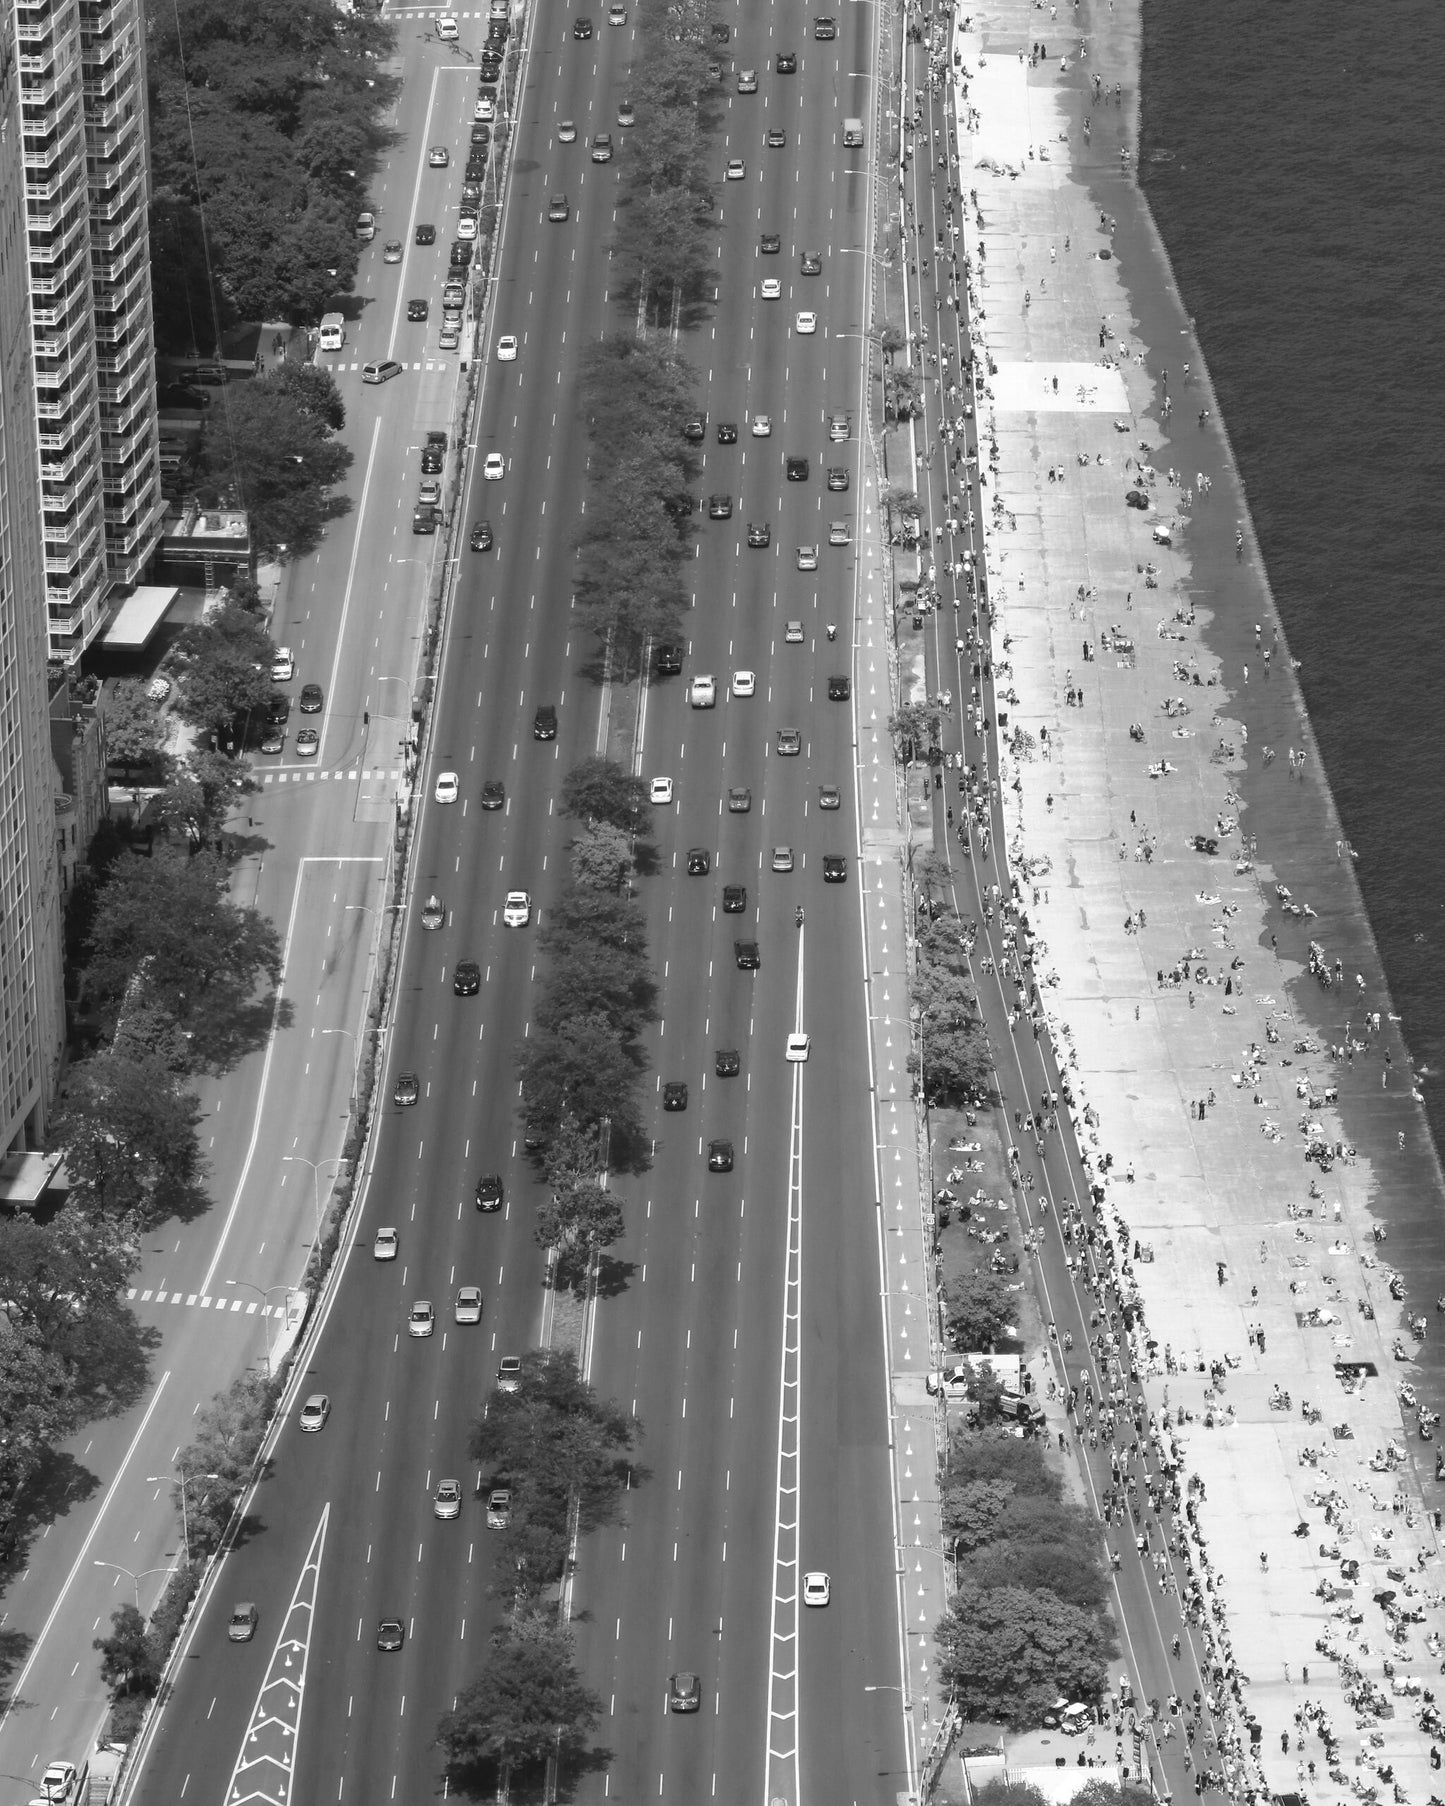 VERTICAL Chicago Lake Shore Drive print, black and white Chicago print, Chicago wall art, large paper, framed print or canvas, 5x7 to 32x48"